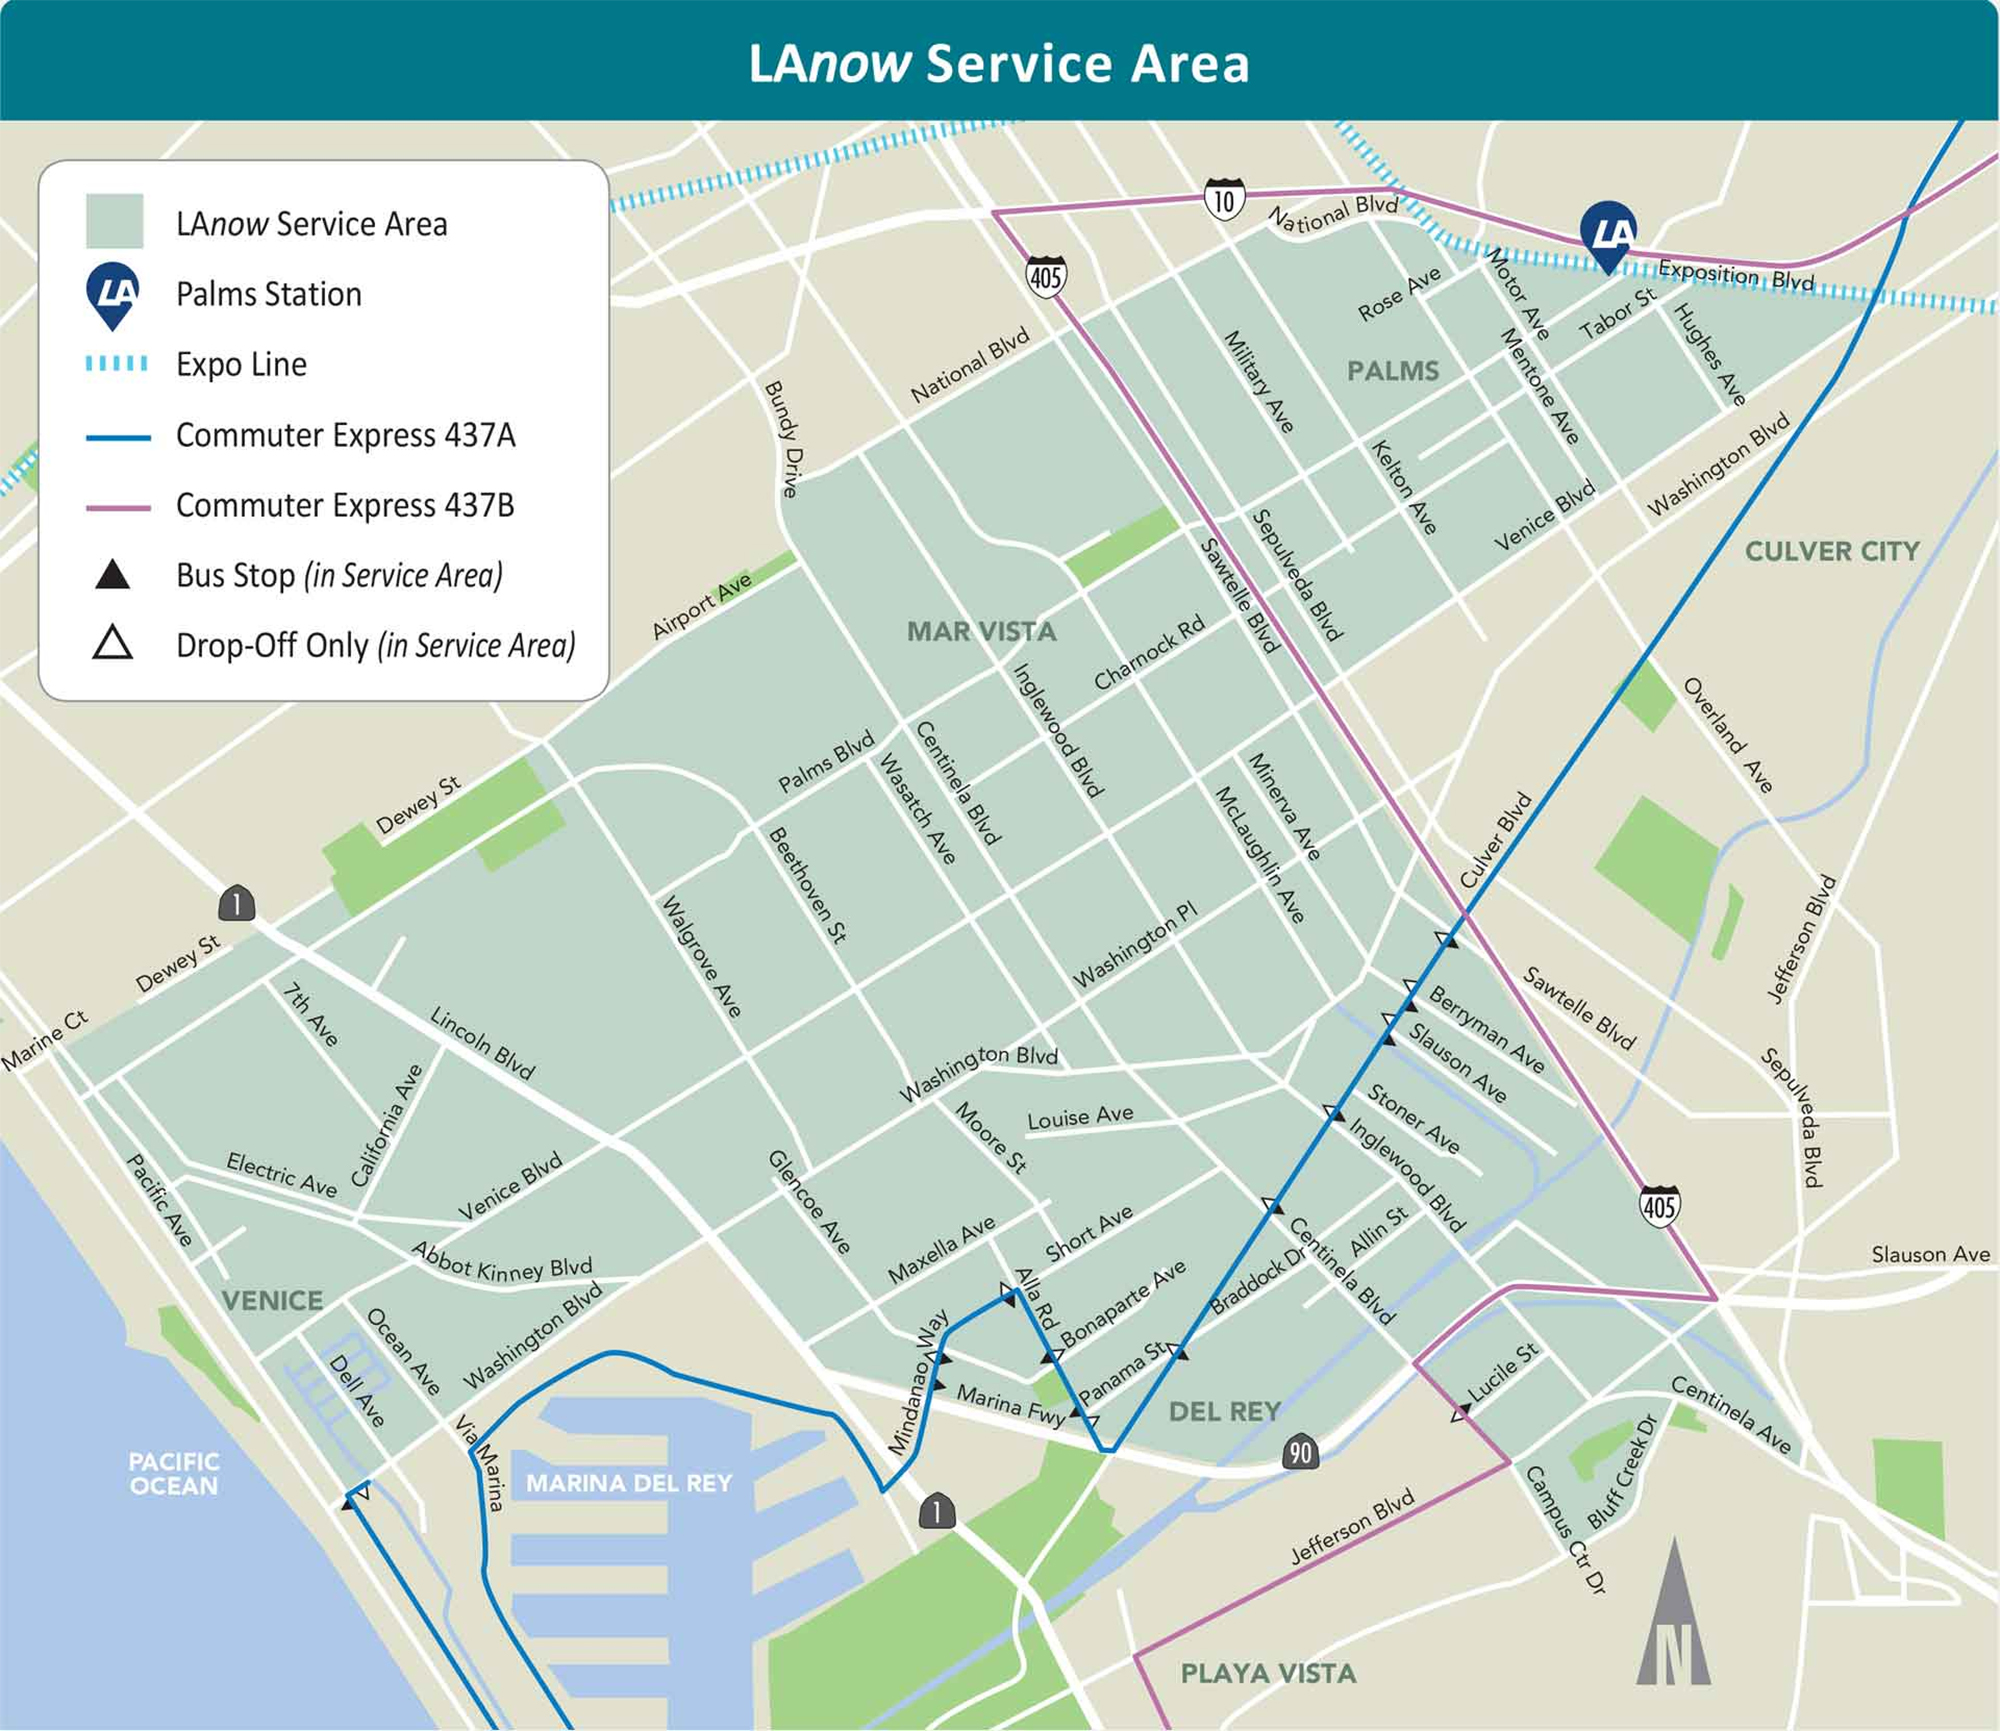 LaNow Services Areas map